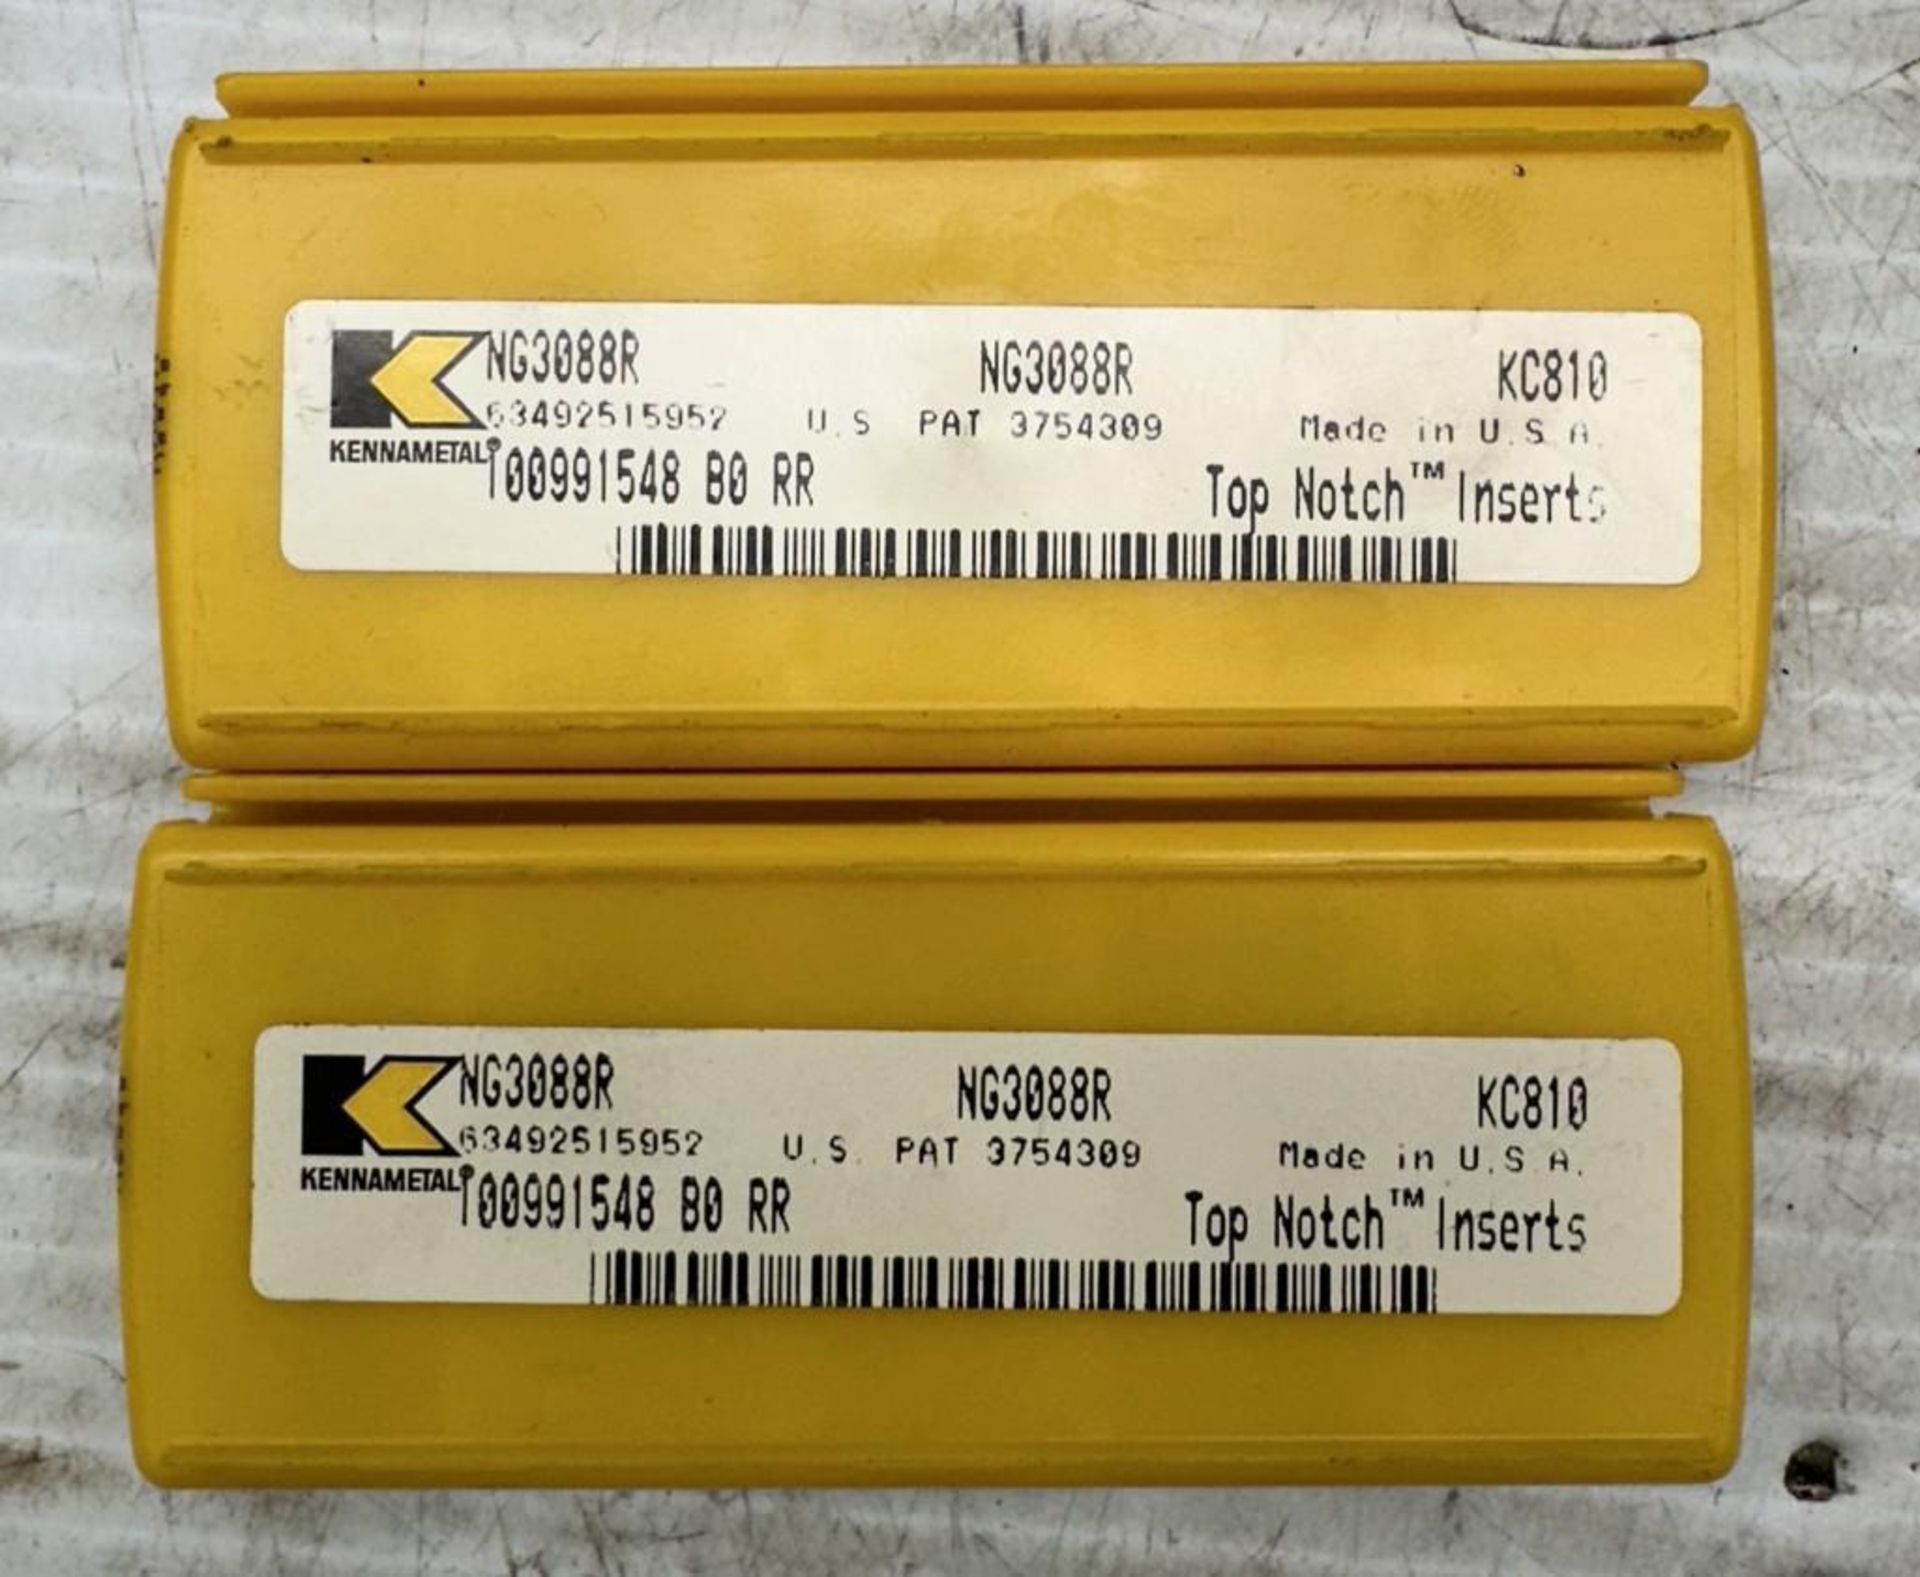 Lot of Kennametal #NG3088R Carbide Inserts - Image 2 of 2